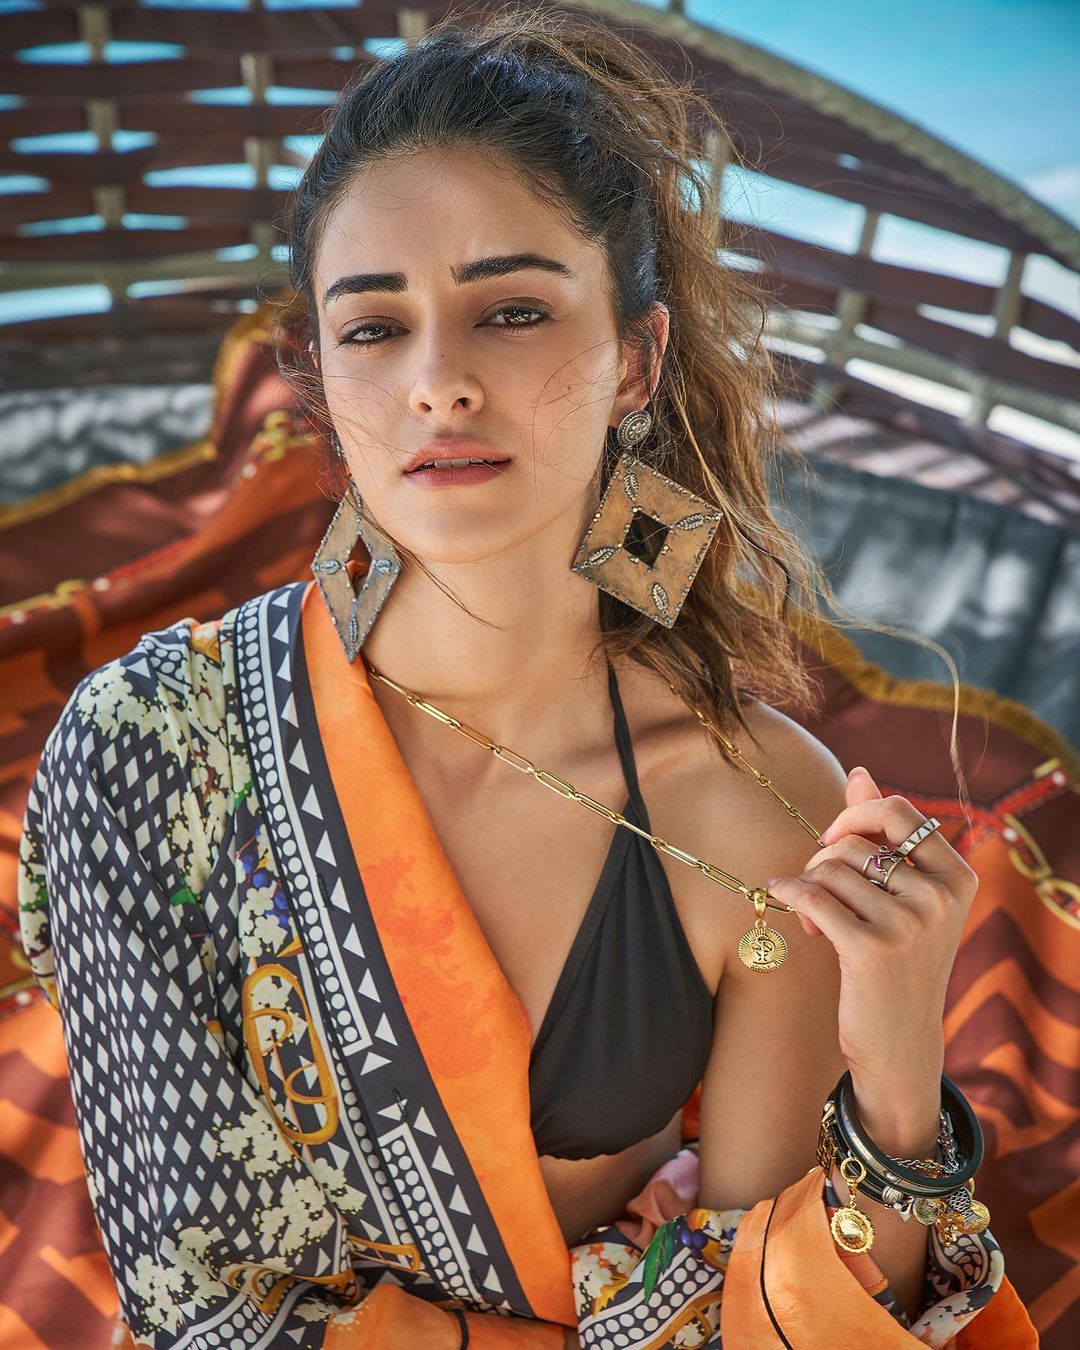 ananya panday gives bold and boho vibes in orange t shirt and black bikini check out pictures Ananya Panday offers Daring and Boho vibes in Orange T-shirt and black bikini, Take a look at Images | IWMBuzz